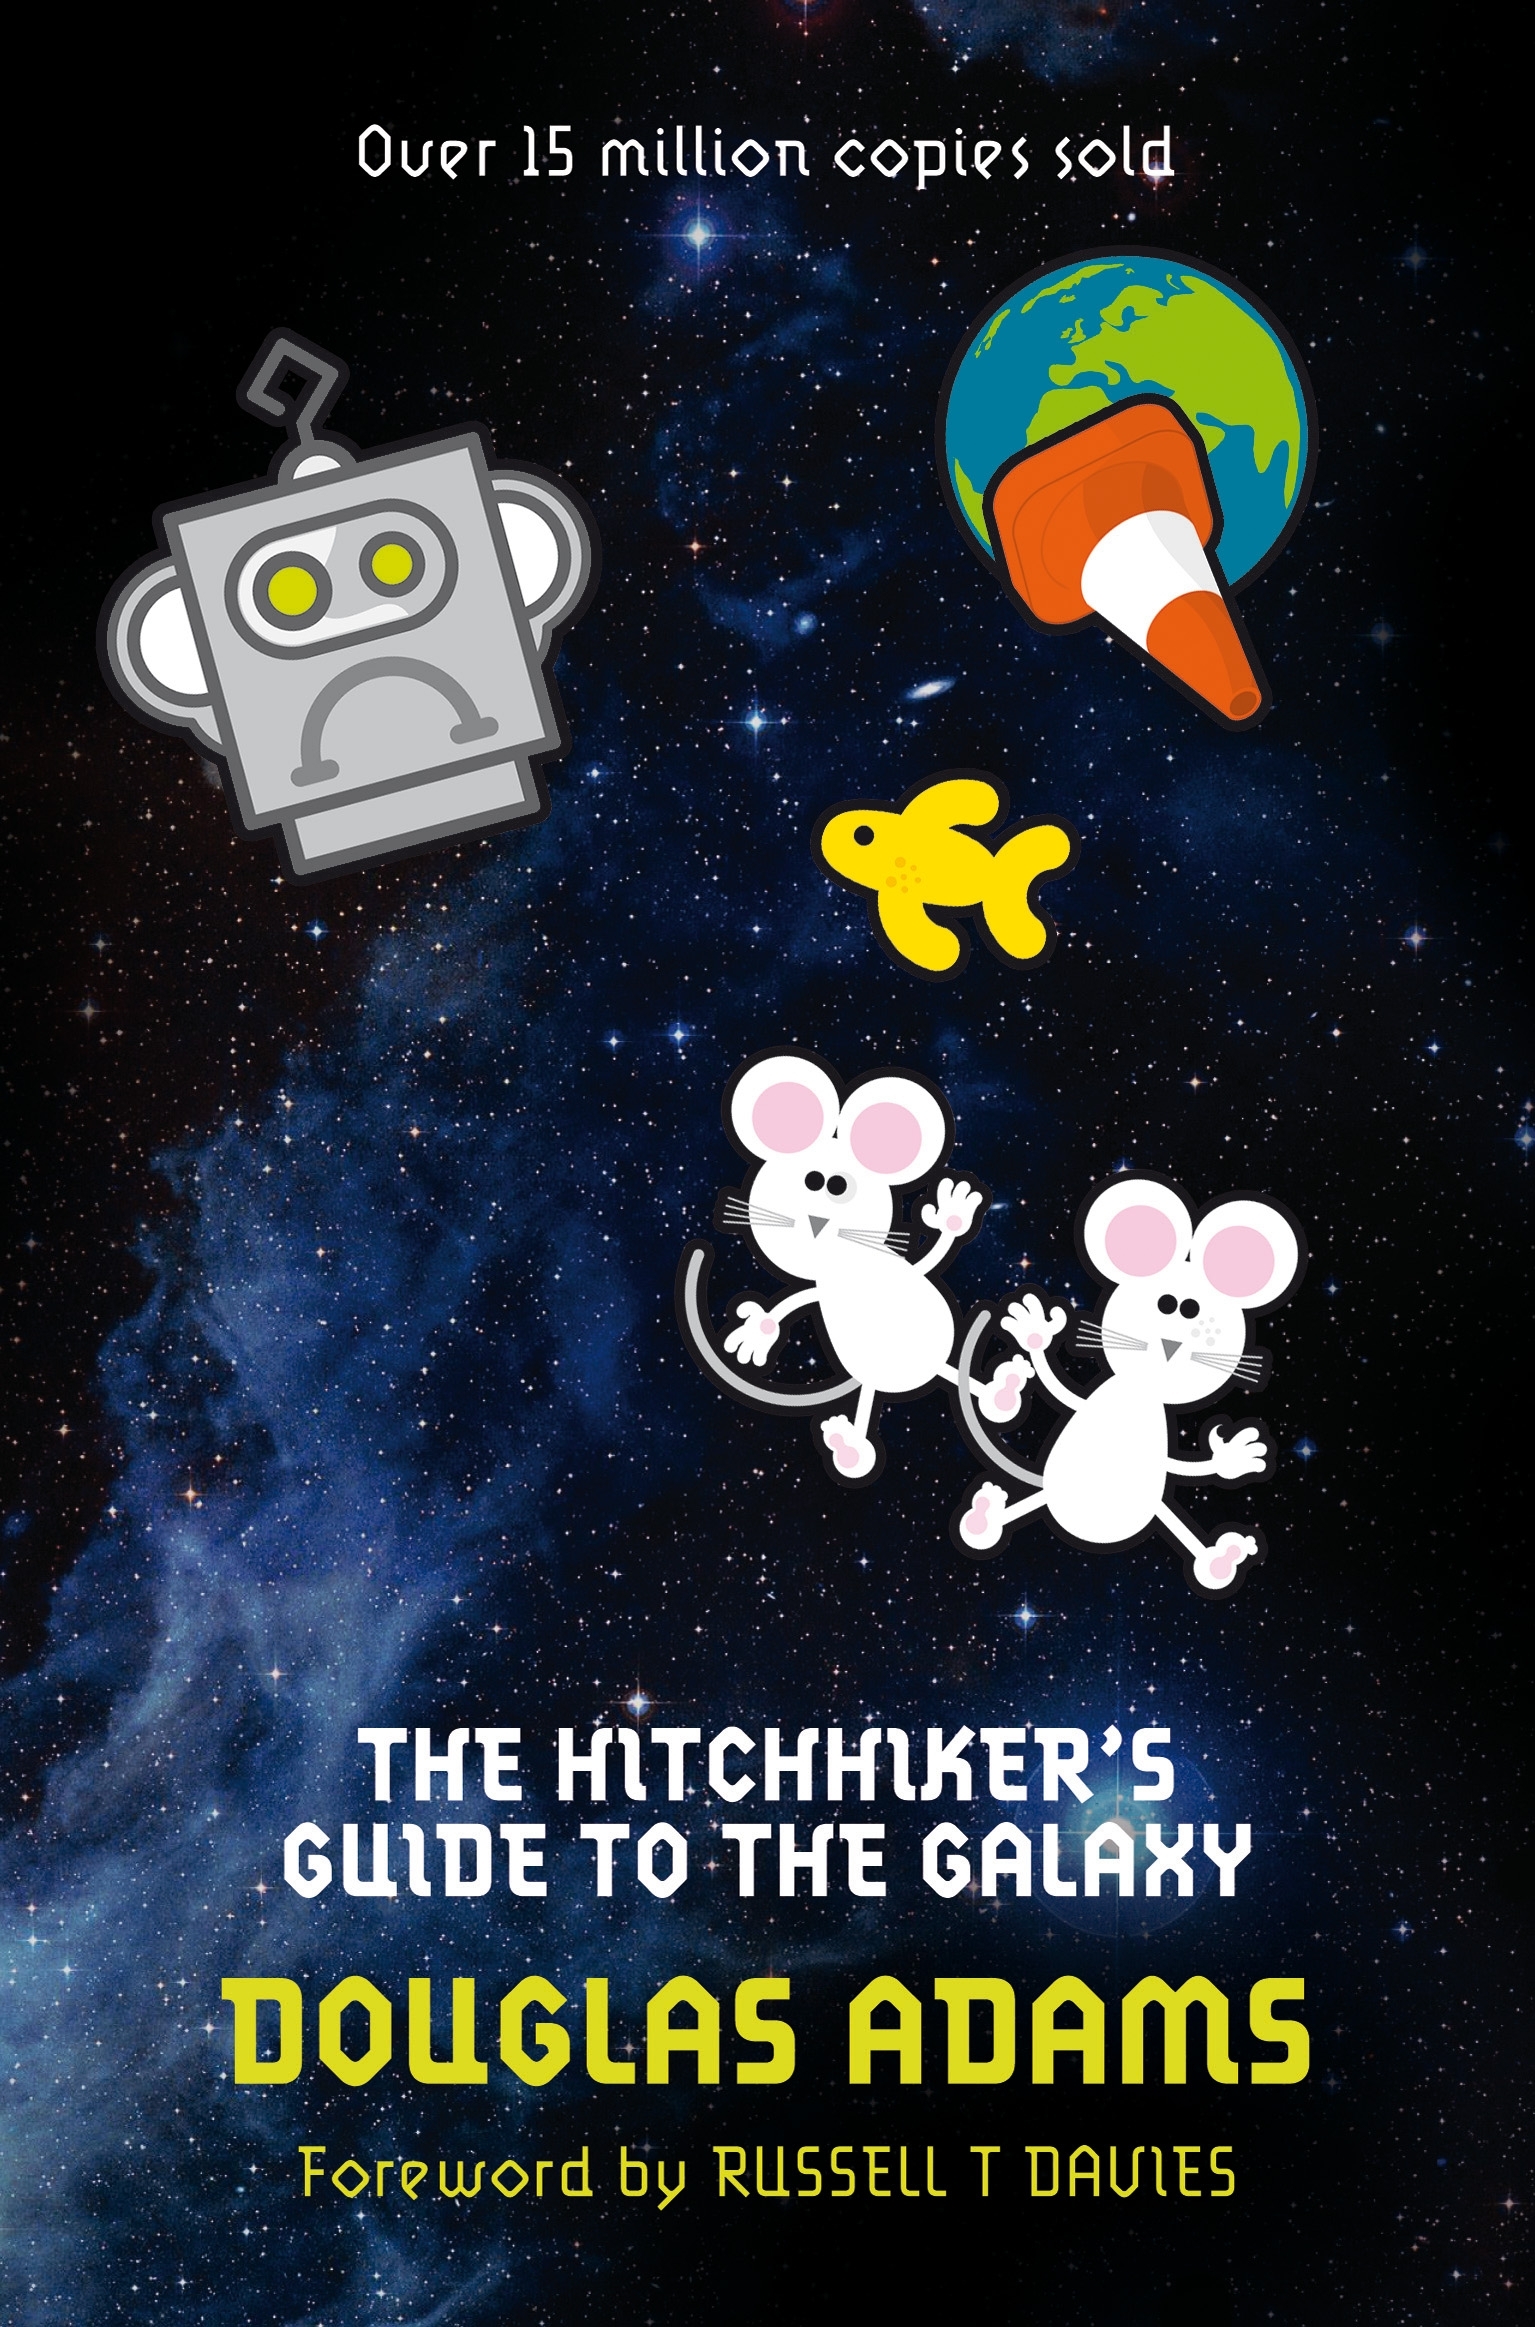 The Hitchhiker's Guide To The Galaxy #9